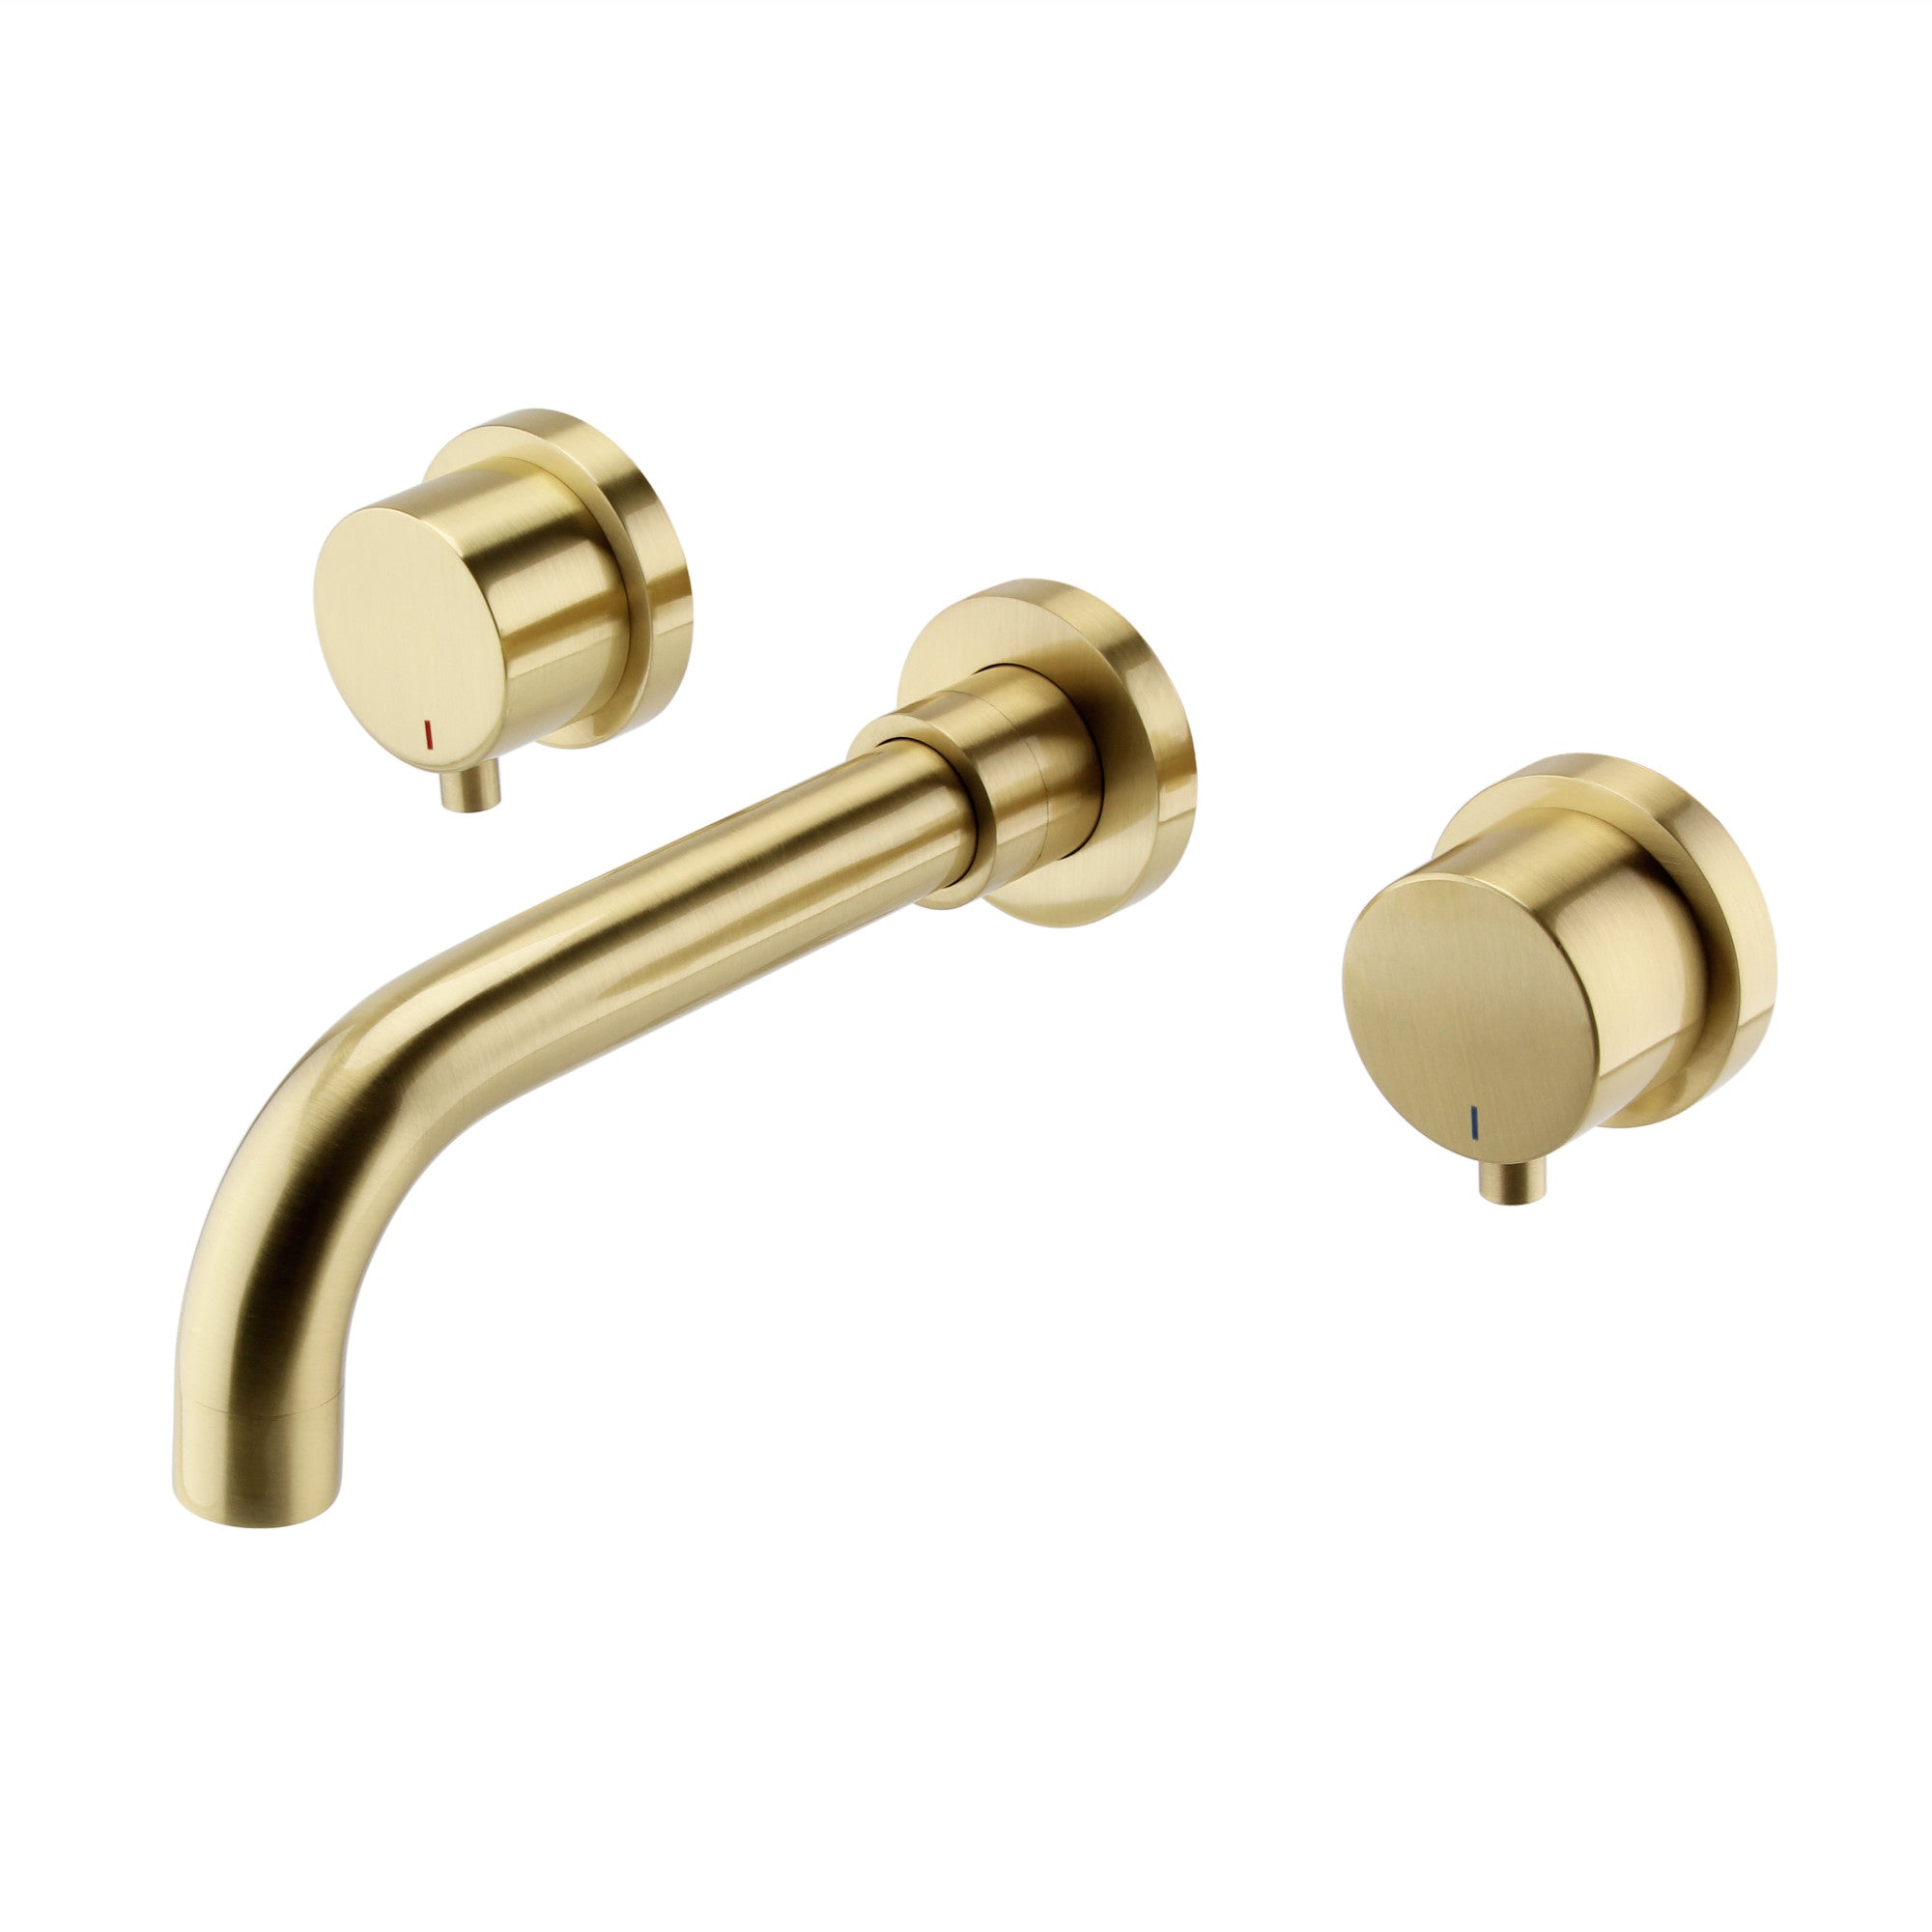 Sienna contemporary wall mounted basin mixer tap (3TH) - brushed brass